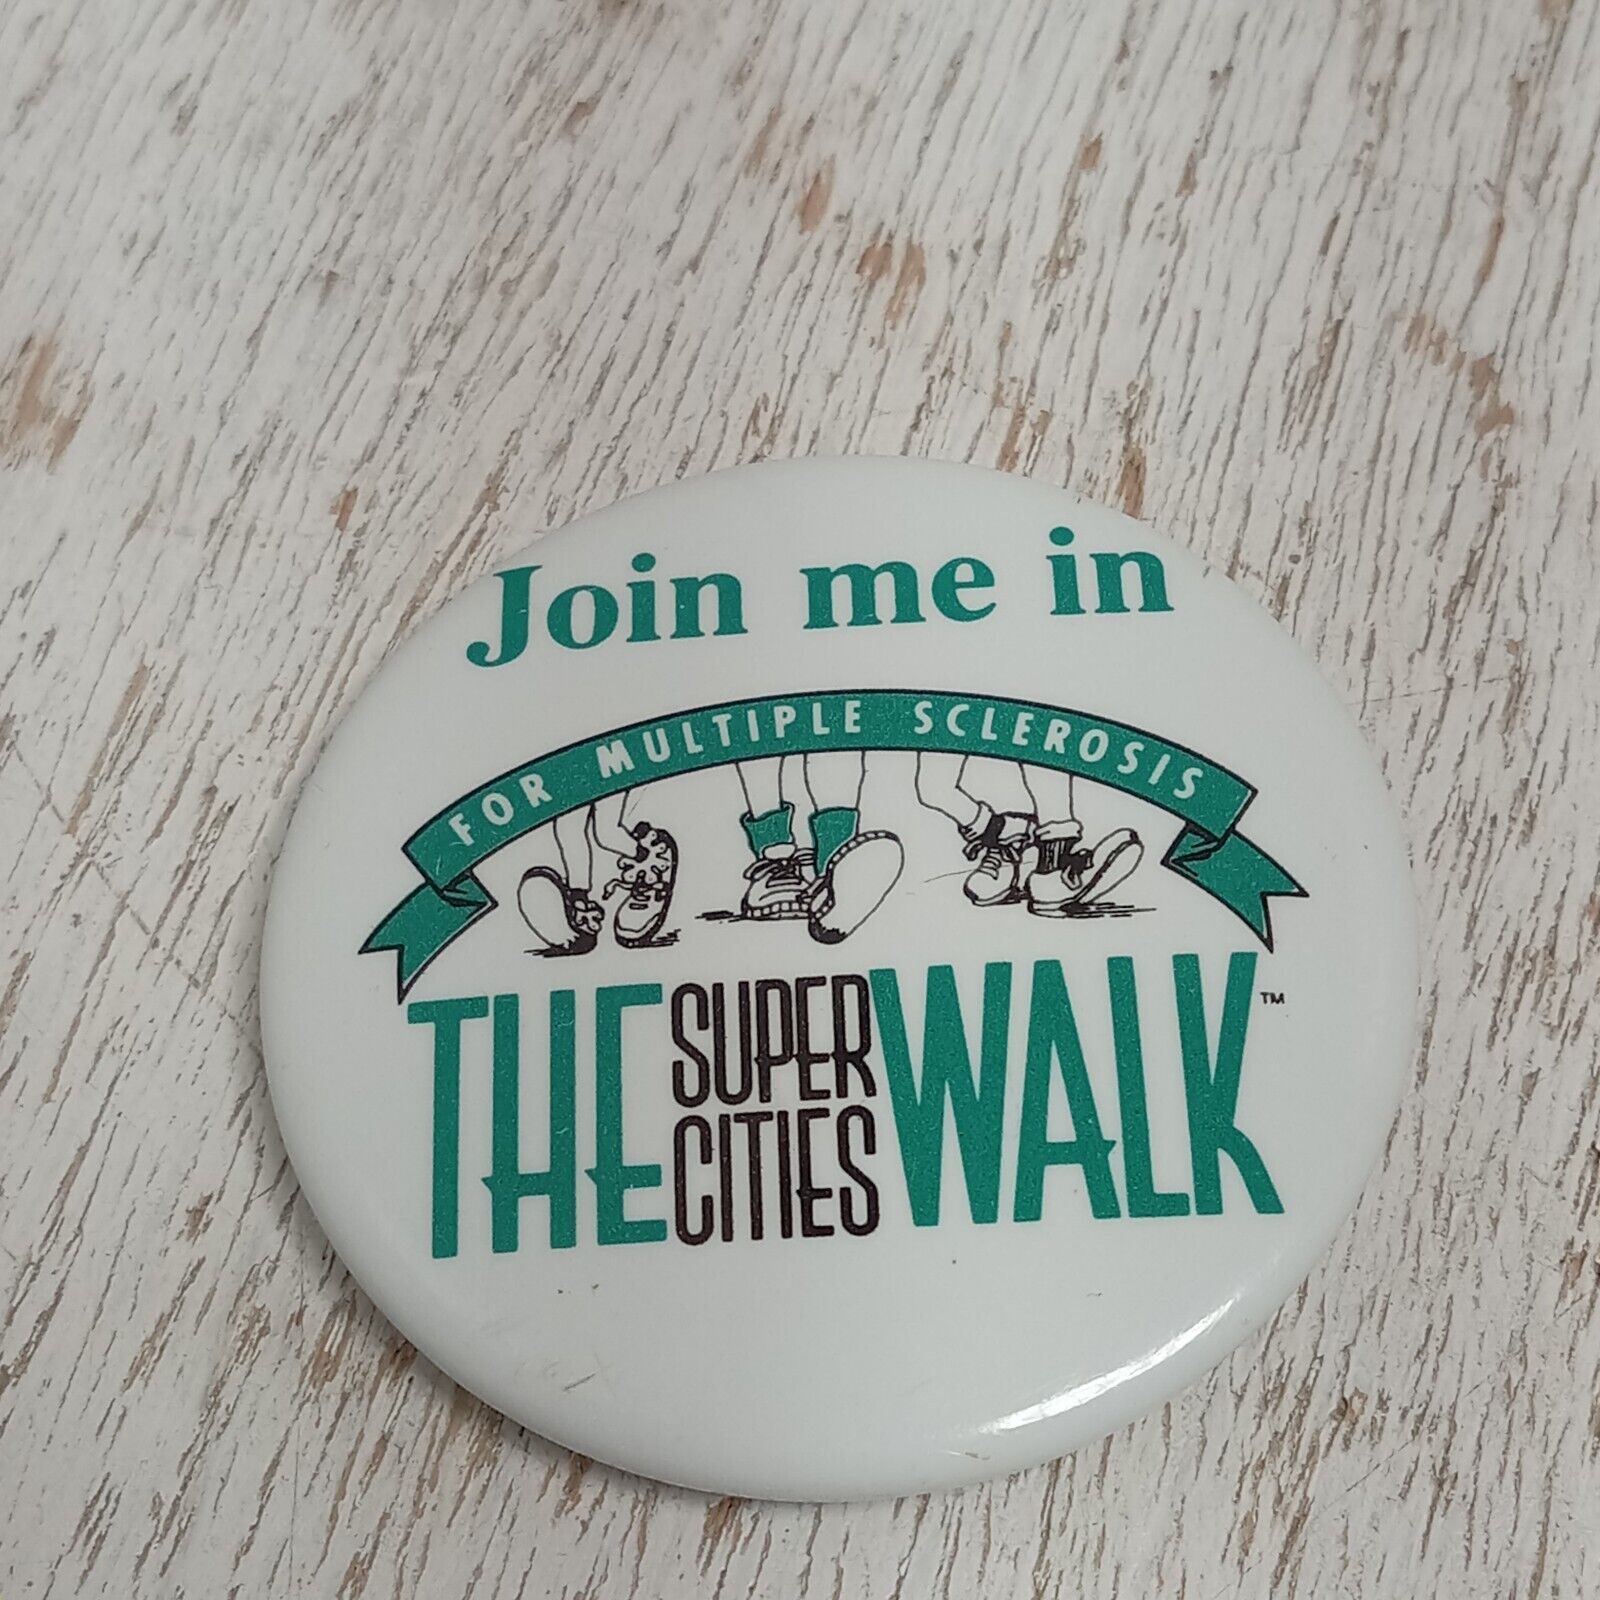 Super Cities Walk Pinback Button Join Me In The Walk For Multiple Sclerosis Pin